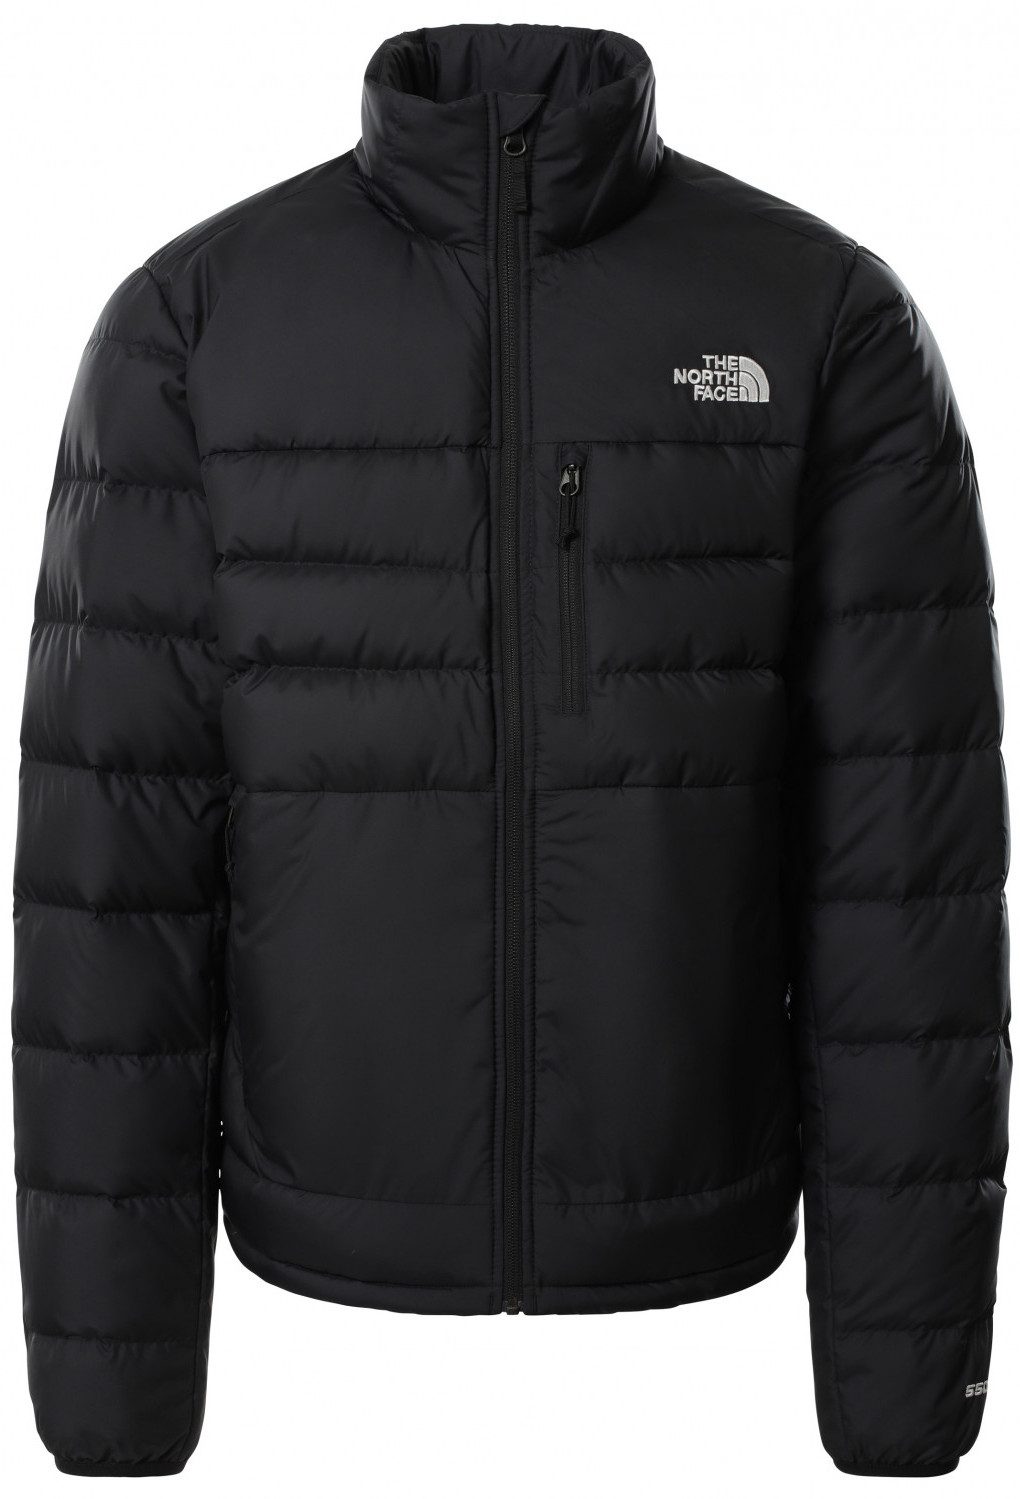 Unlock Wilderness' choice in the Helly Hansen Vs North Face comparison, the Aconcagua 2 Jacket by North Face